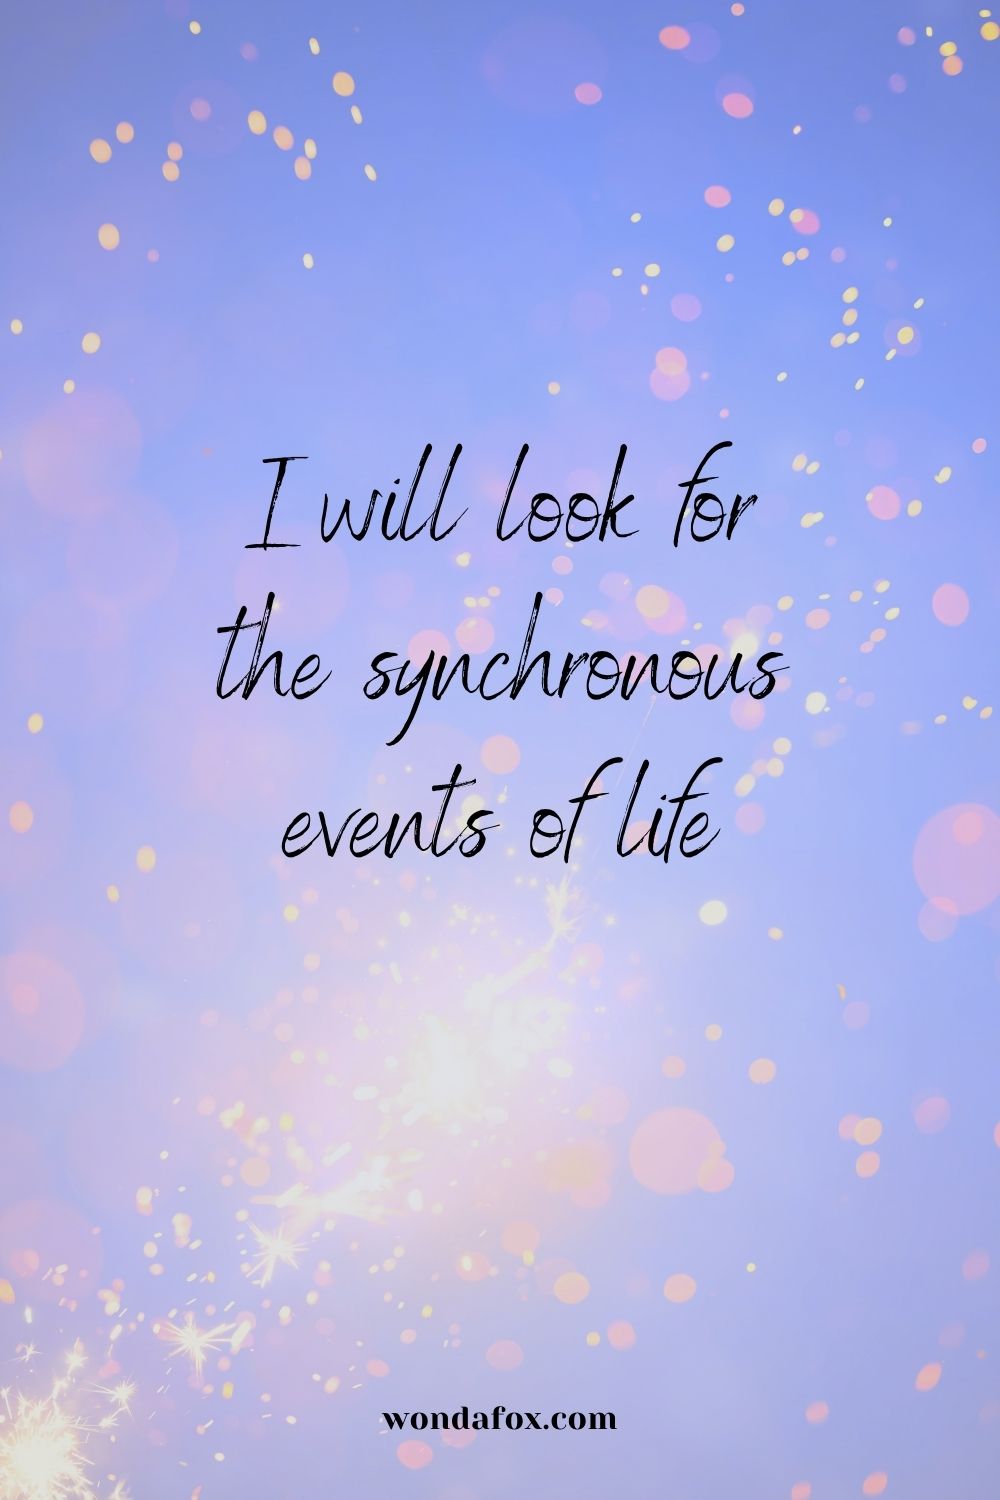 I will look for the synchronous events of life